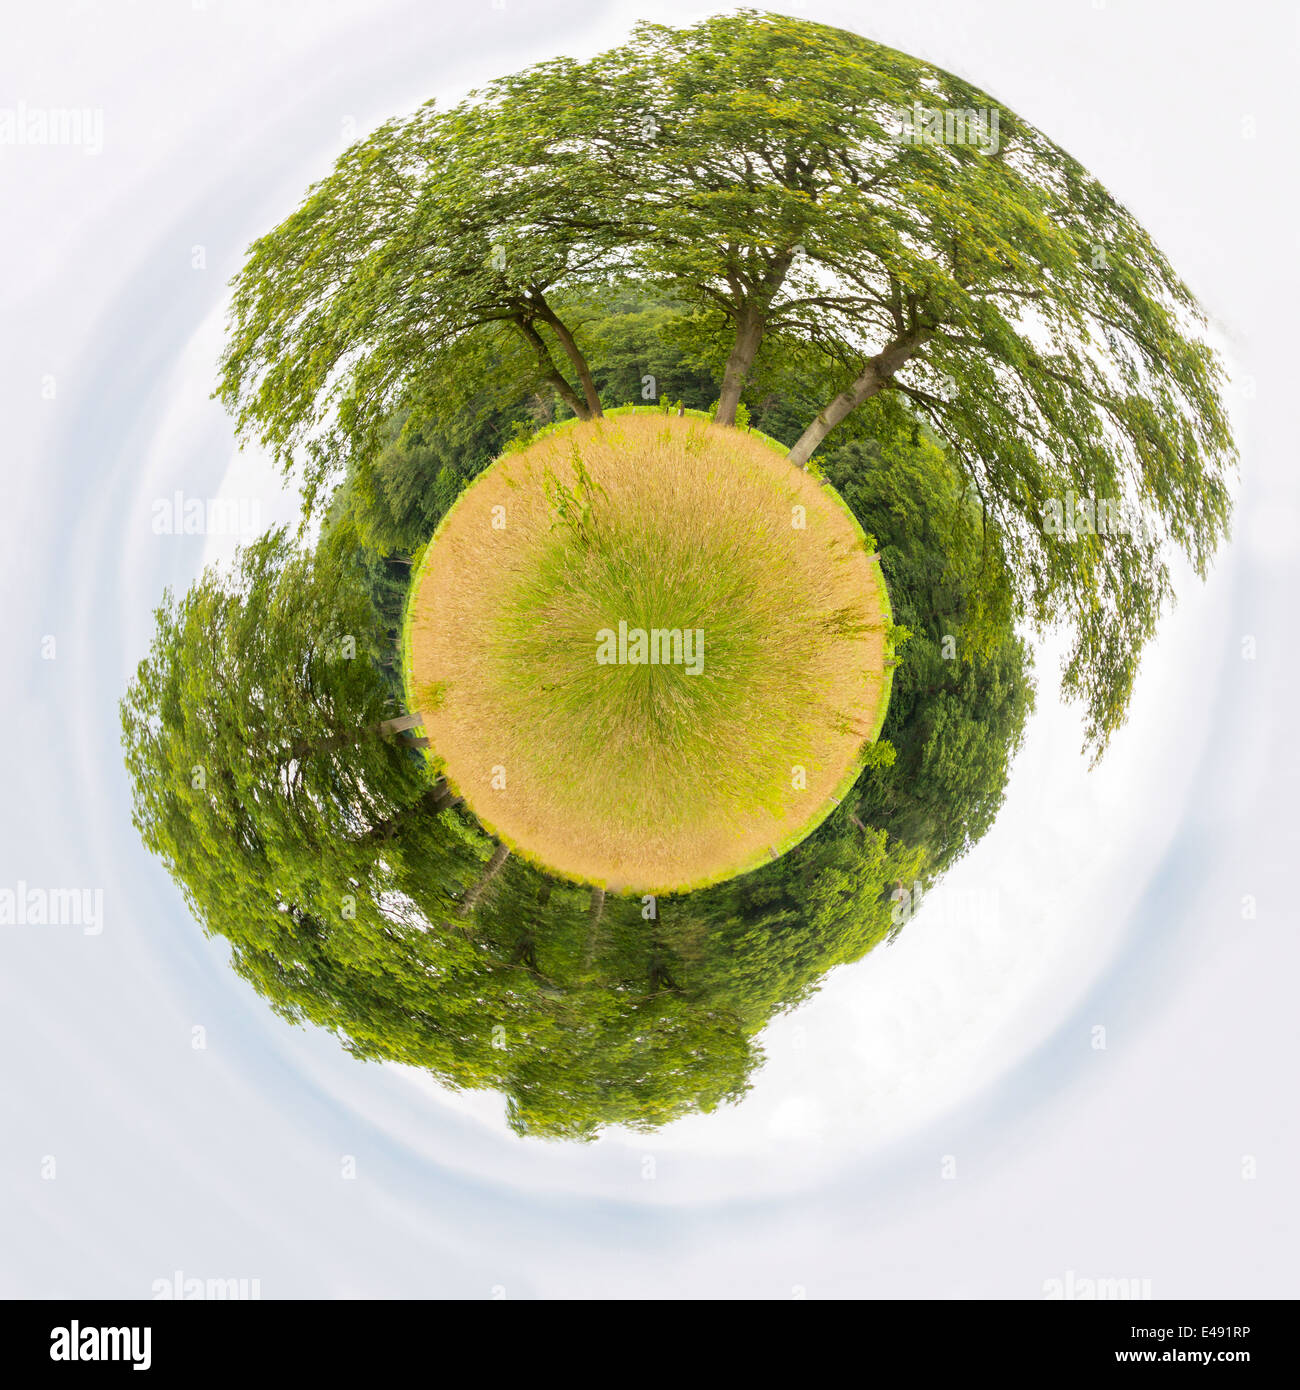 Meadow with trees like little planet Stock Photo